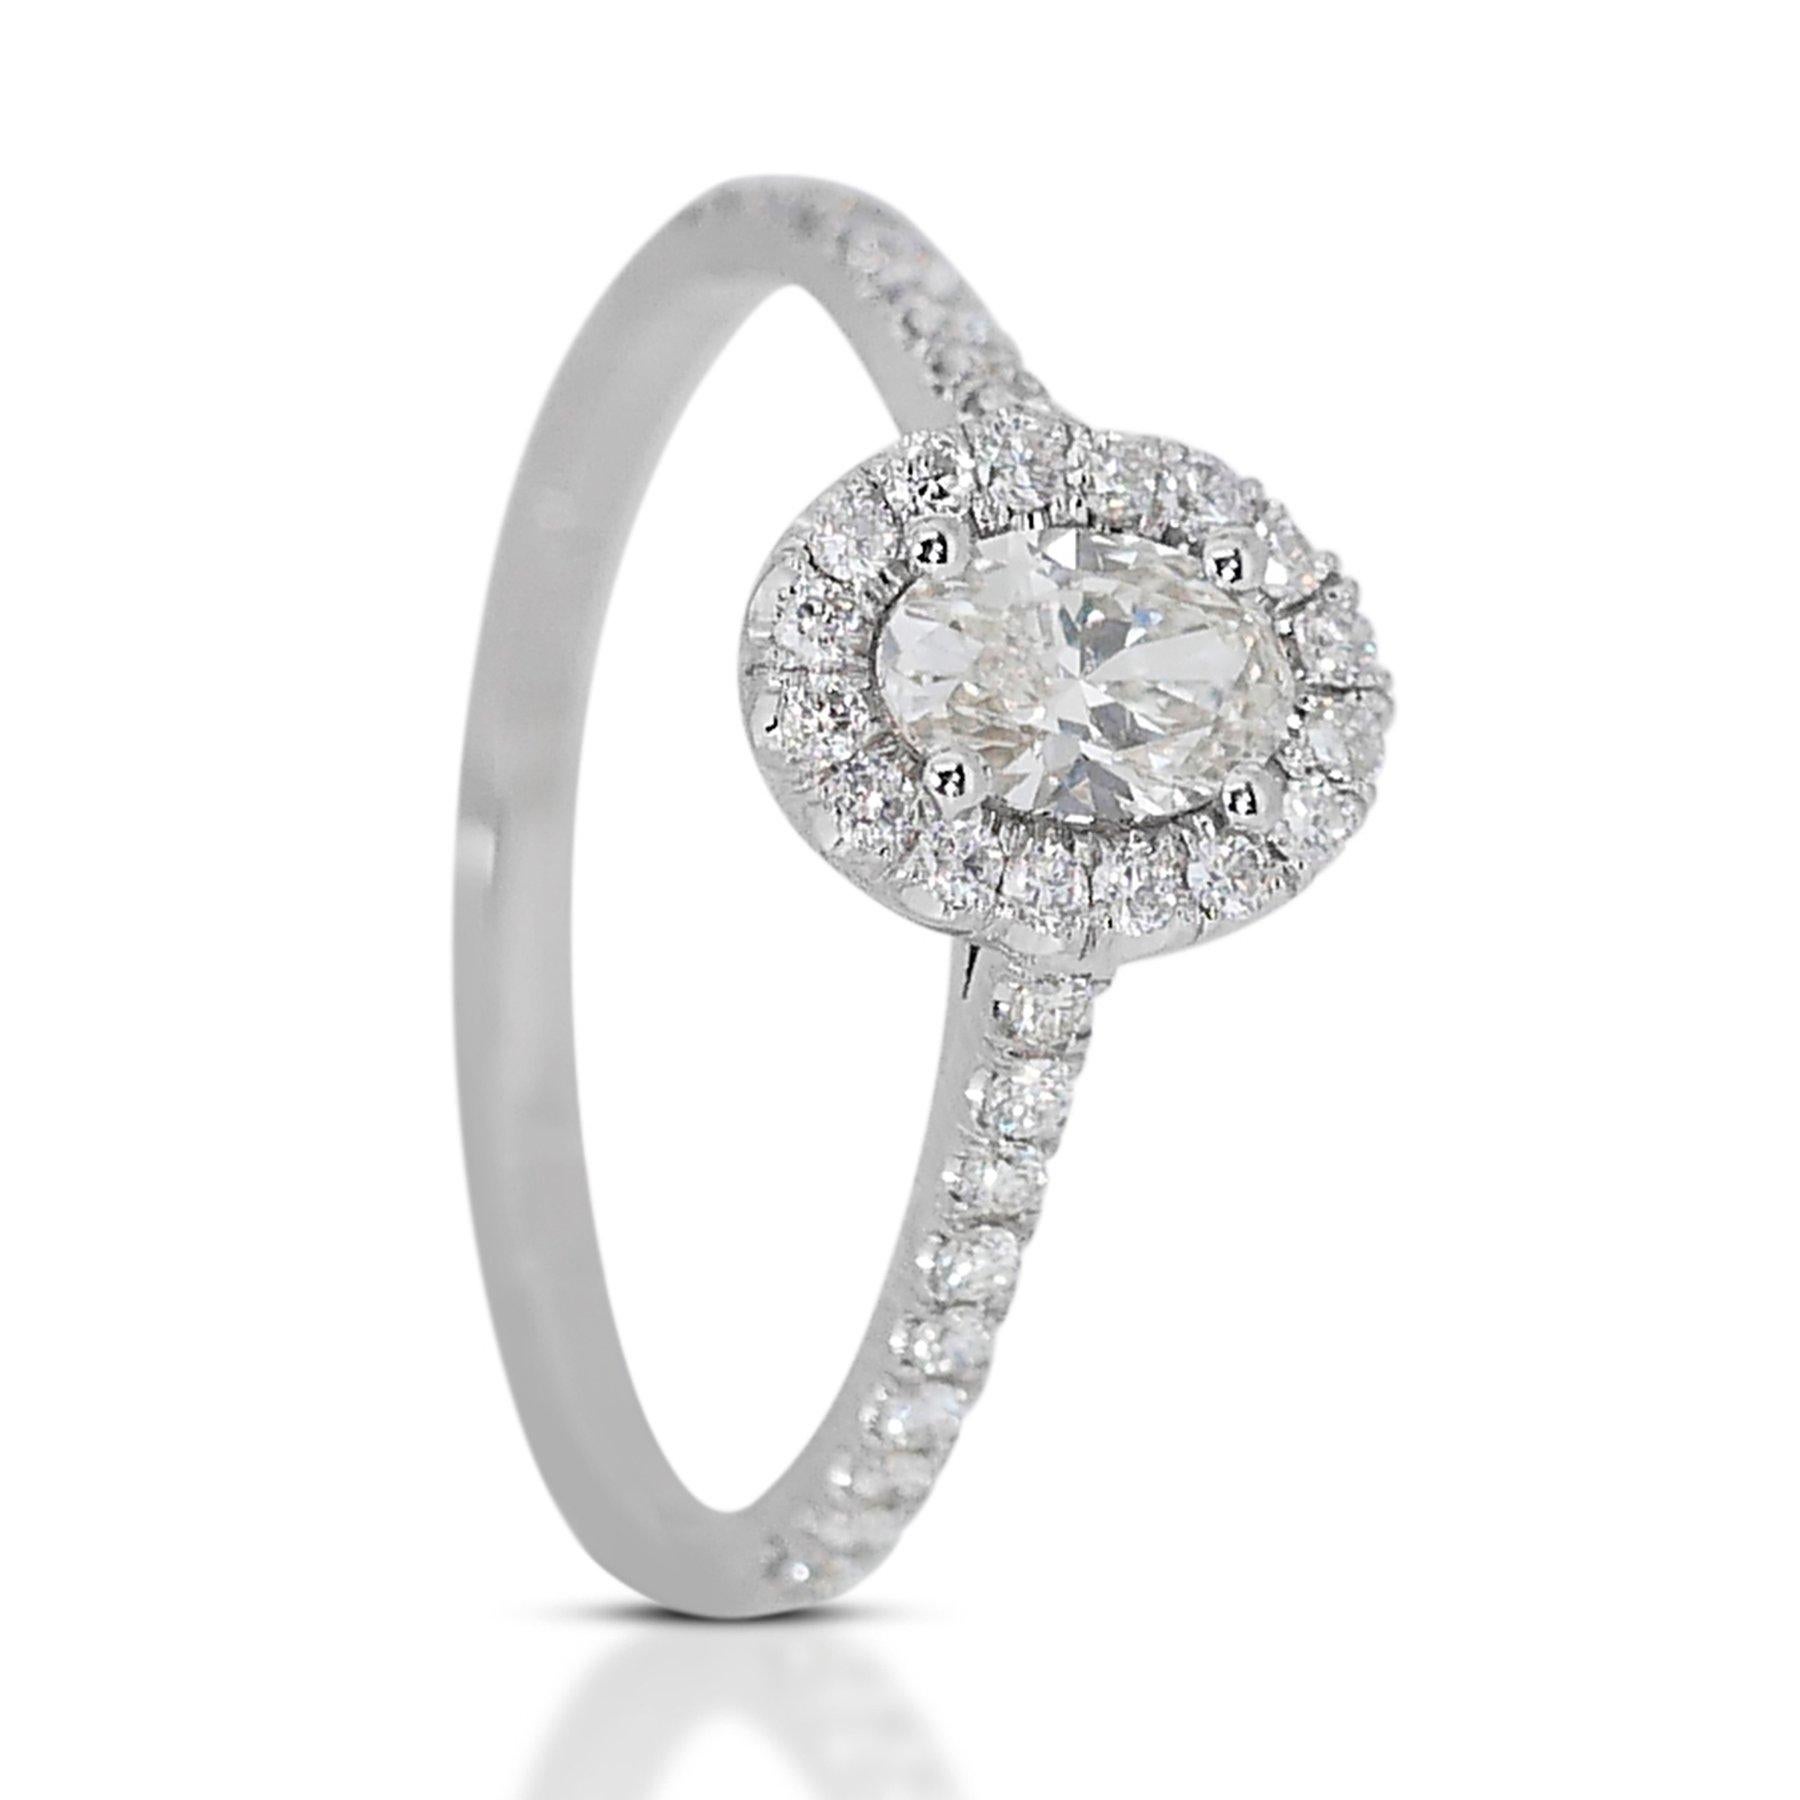 Captivating 1.01 ct Oval Diamond Halo Ring in 18k White Gold – GIA Certified

This exquisite diamond halo ring, set in polished 18k white gold, showcases a stunning 0.71-carat oval main diamond. Surrounding the main stone, 34 round diamonds totaling